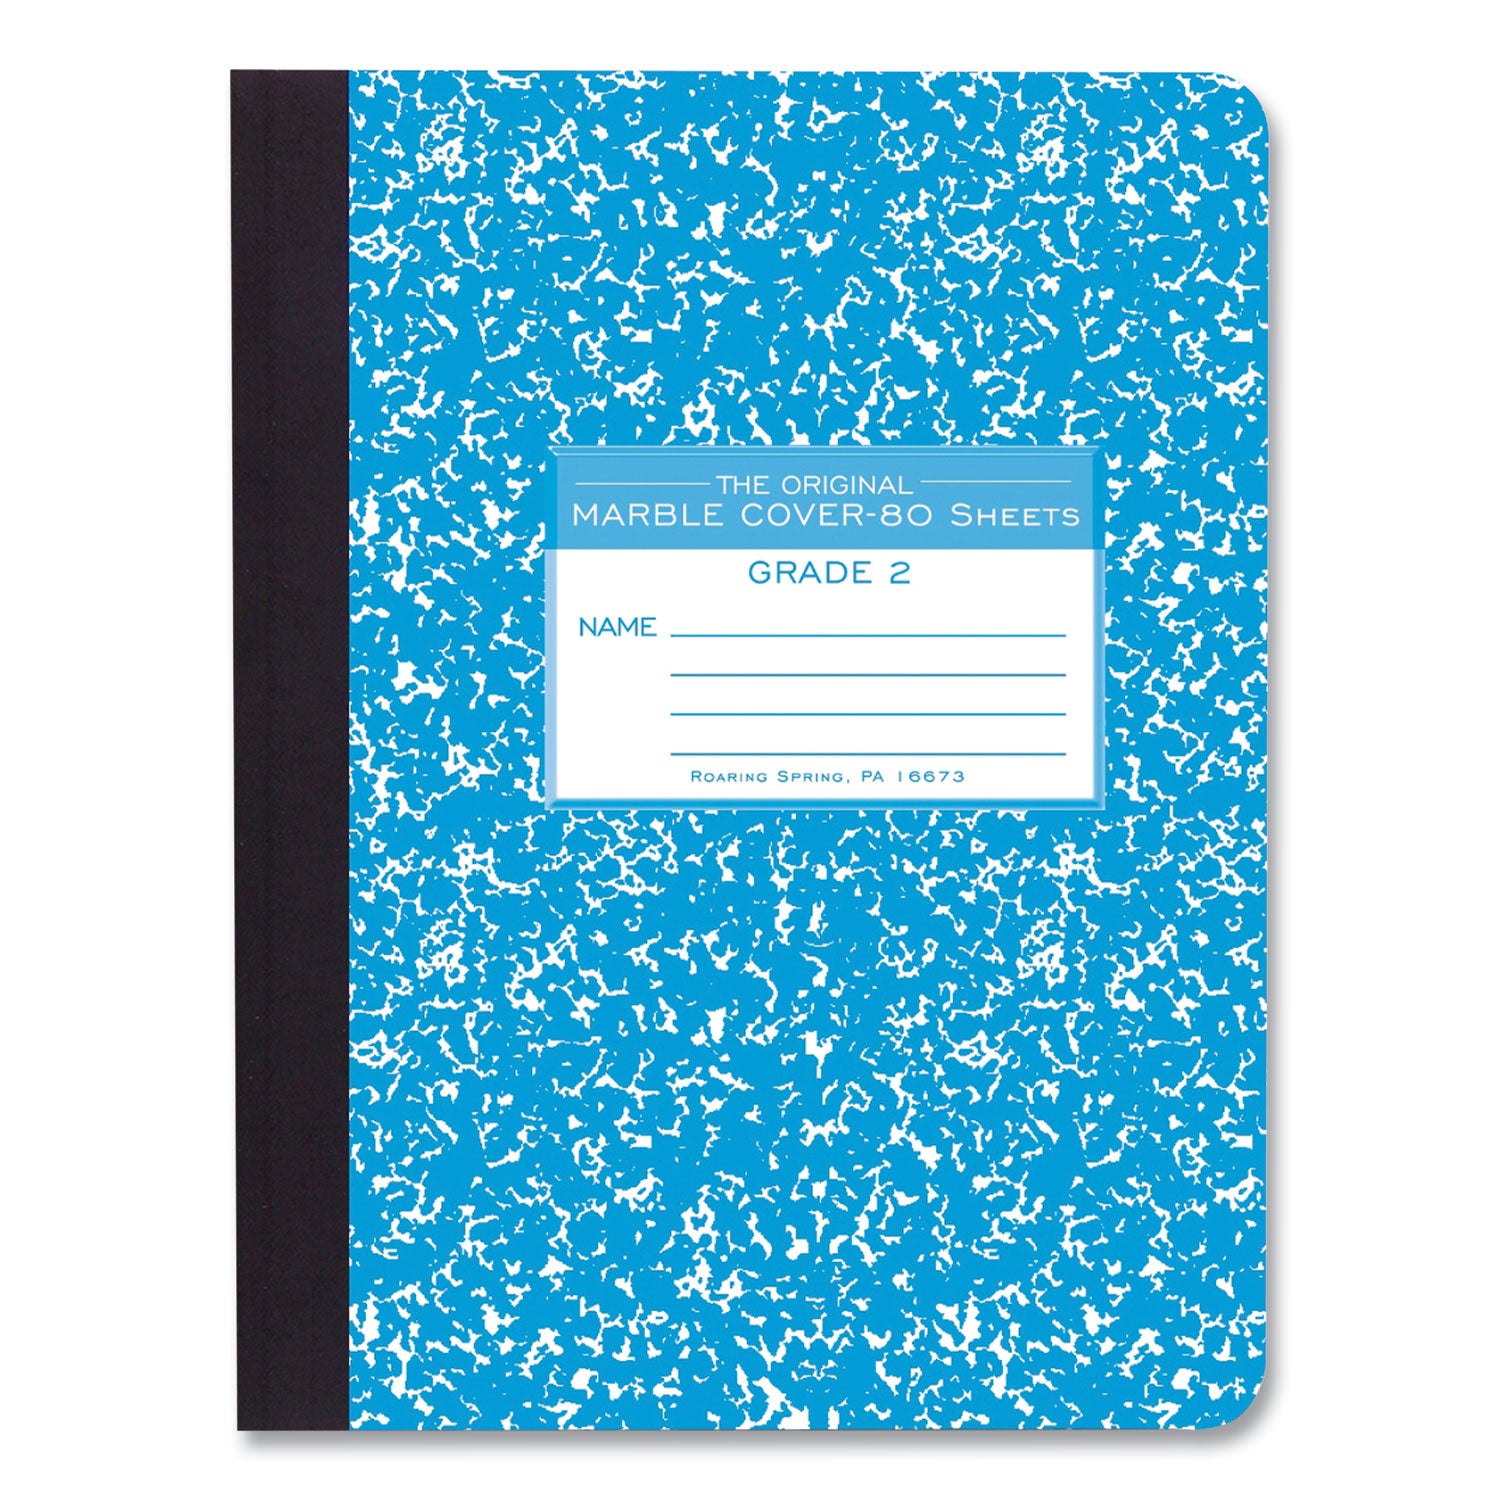 ruled-composition-book-grade-2-manuscript-format-blue-marble-cover-80-975-x-75-sheet-48-ct-ships-in-4-6-bus-days_roa97226cs - 2